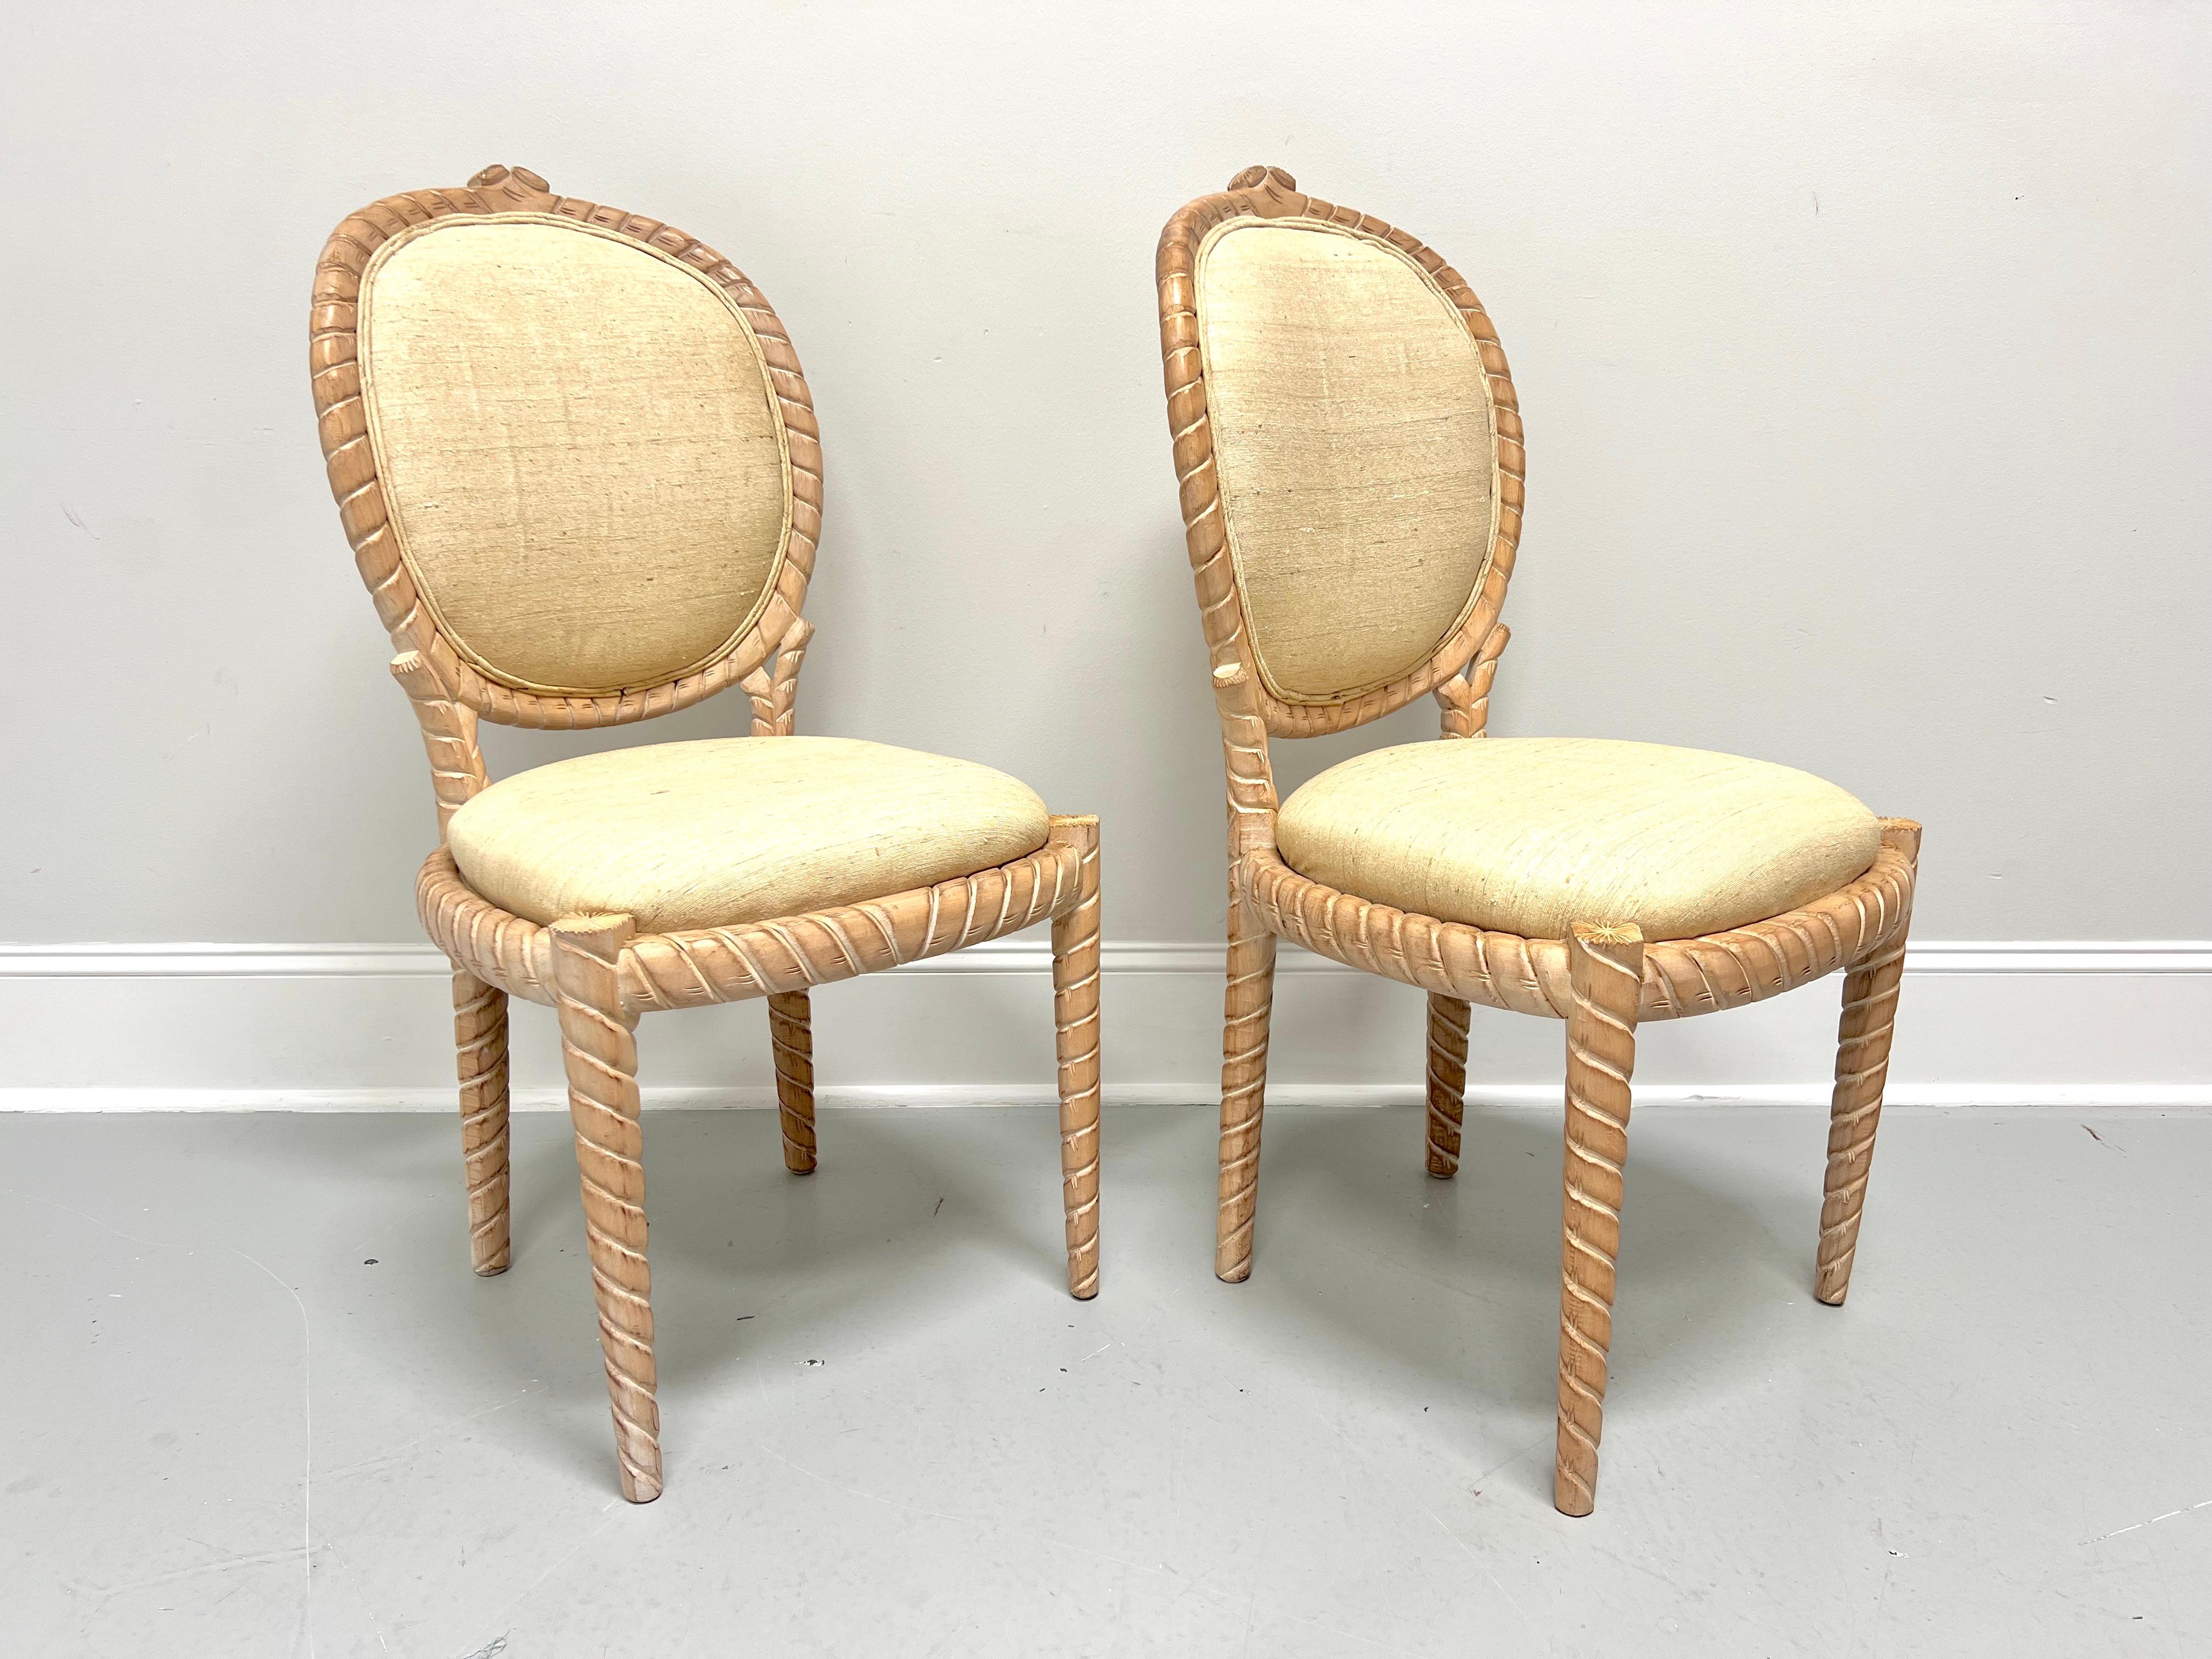 Bohemian 1980's Carved Whitewashed Wood Boho Rope Twist Dining Side Chairs - Pair B For Sale